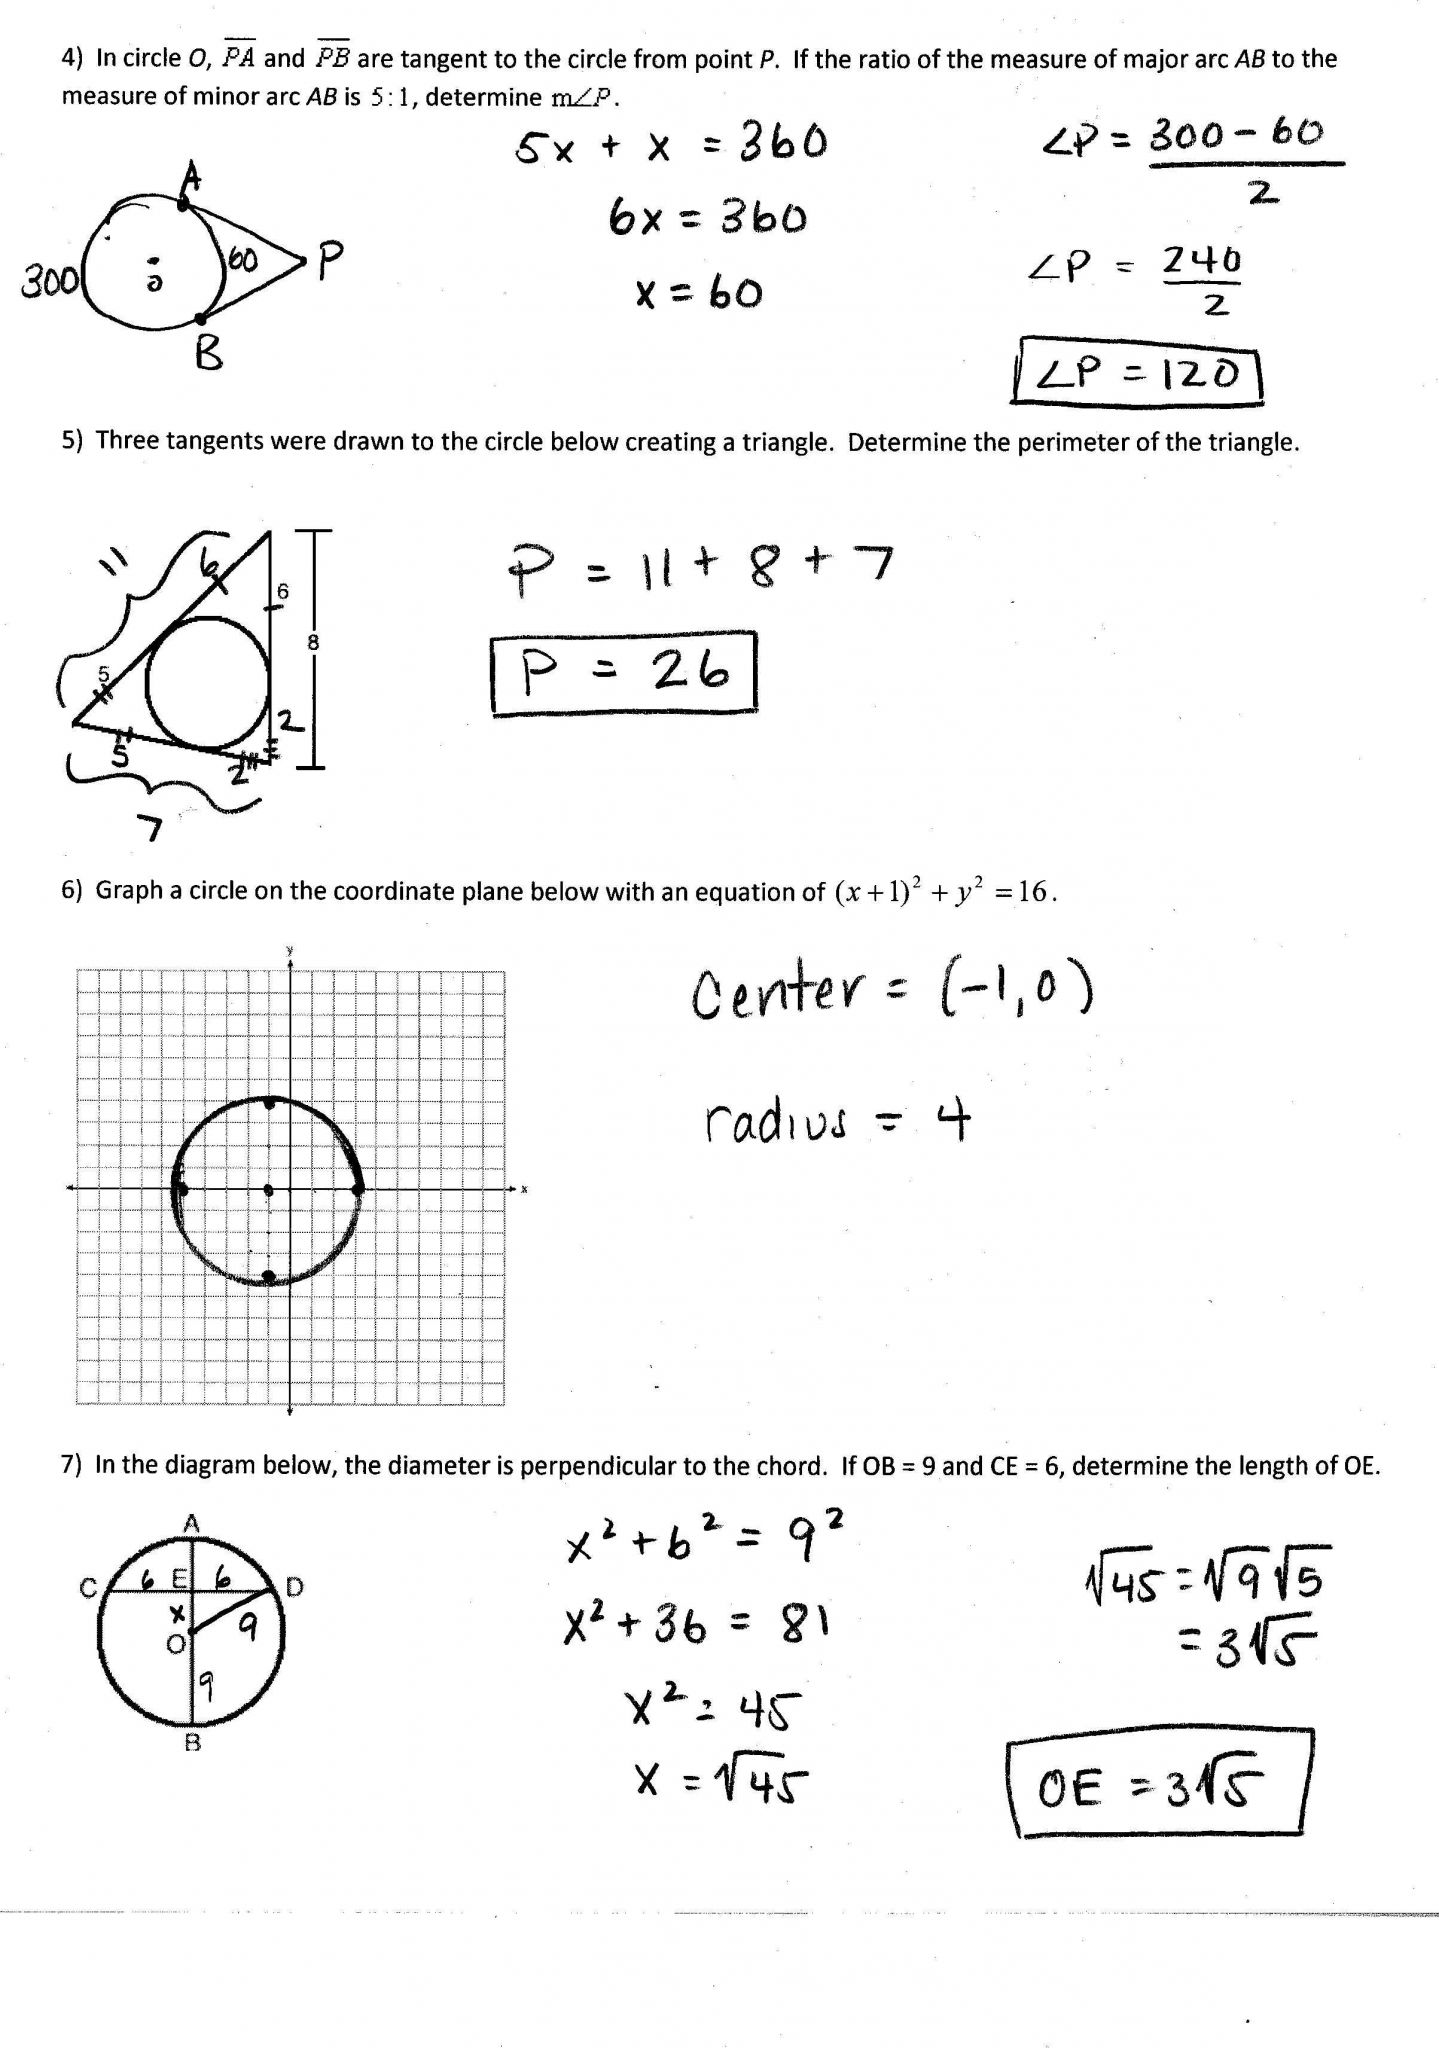 Algebra 2 Worksheet 7.4 A Properties Of Logs Answers as Well as English Term Papers Professional Academic Writing Services Math